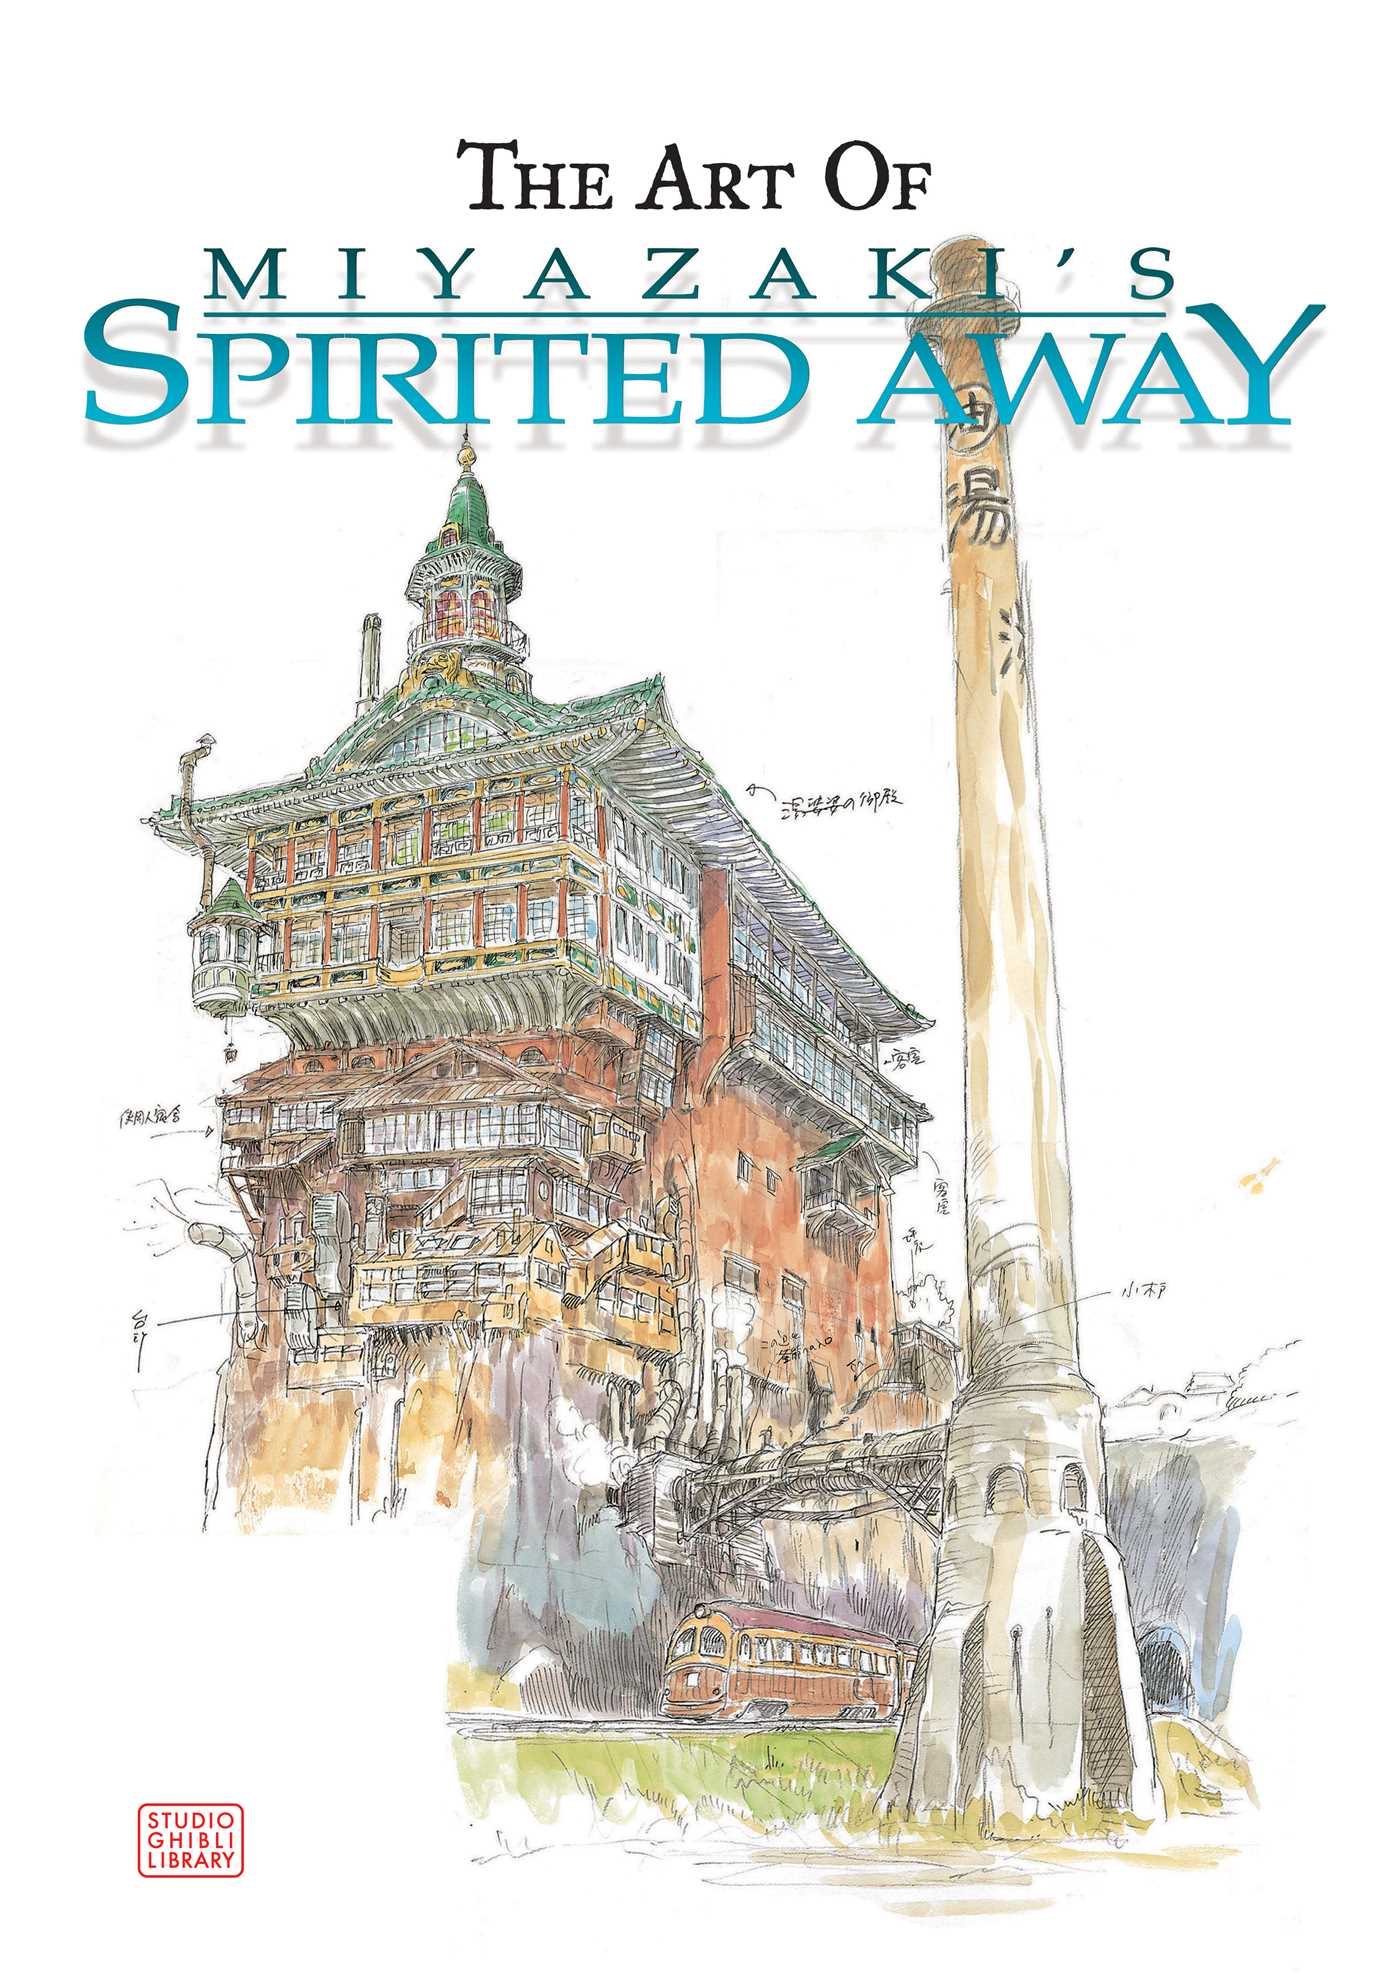 Product Image: The Art of Spirited Away